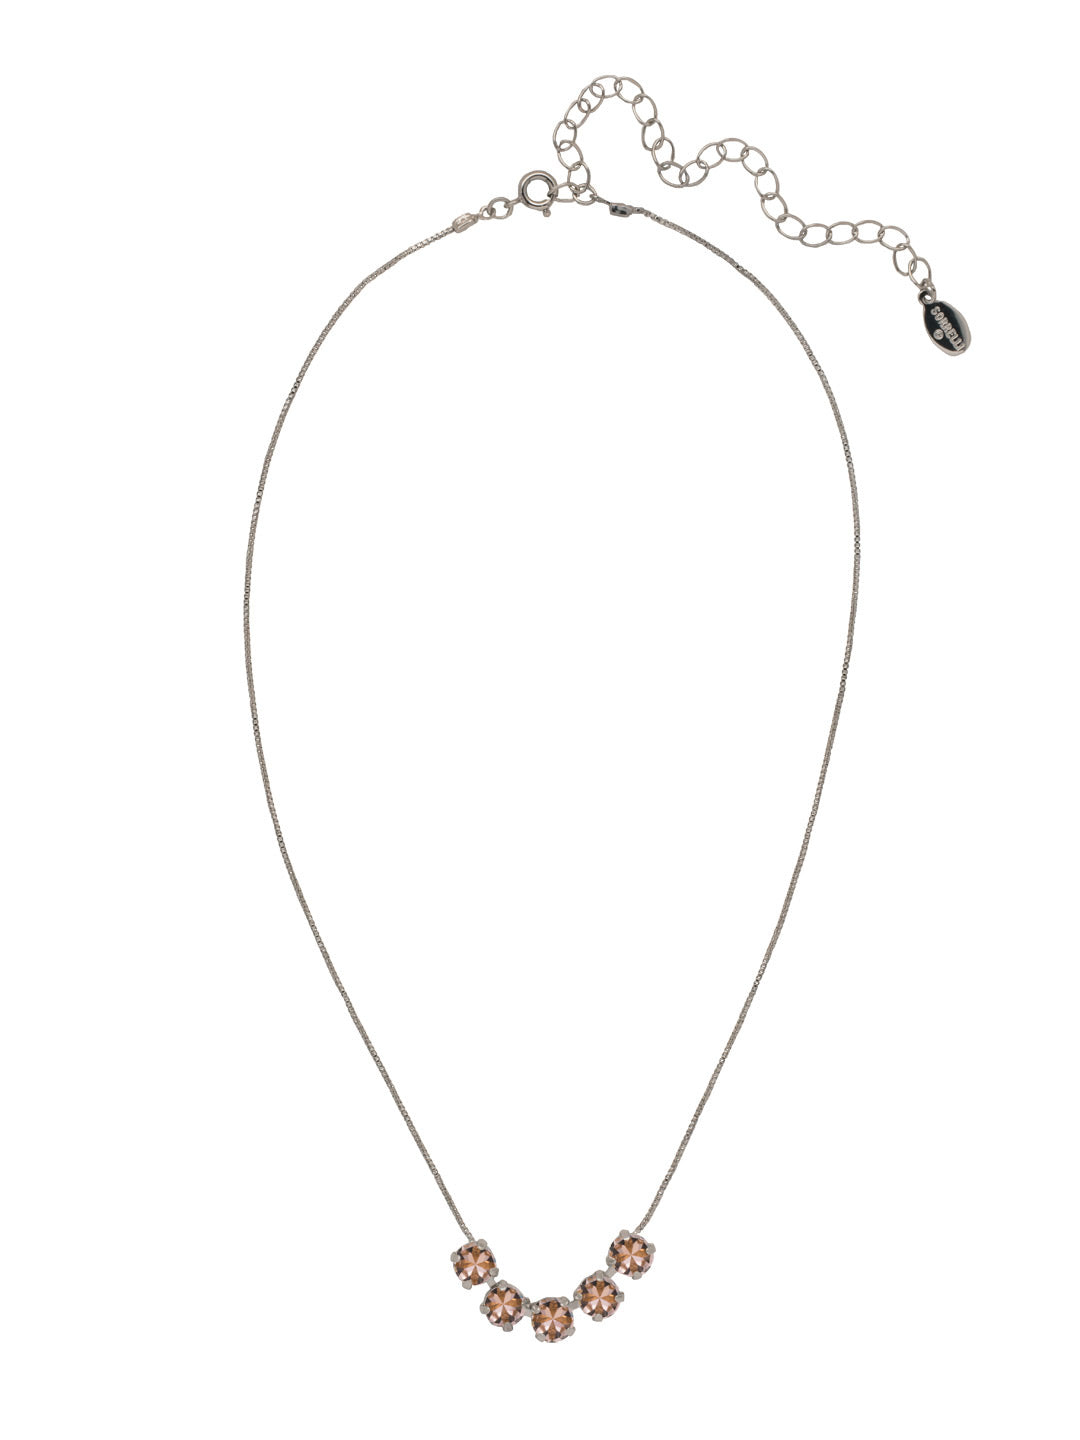 Shaughna Tennis Necklace - NFC84ASVIN - <p>The Shaughna Tennis Necklace features five crystals on a delicate adjustable chain. From Sorrelli's Vintage Rose collection in our Antique Silver-tone finish.</p>